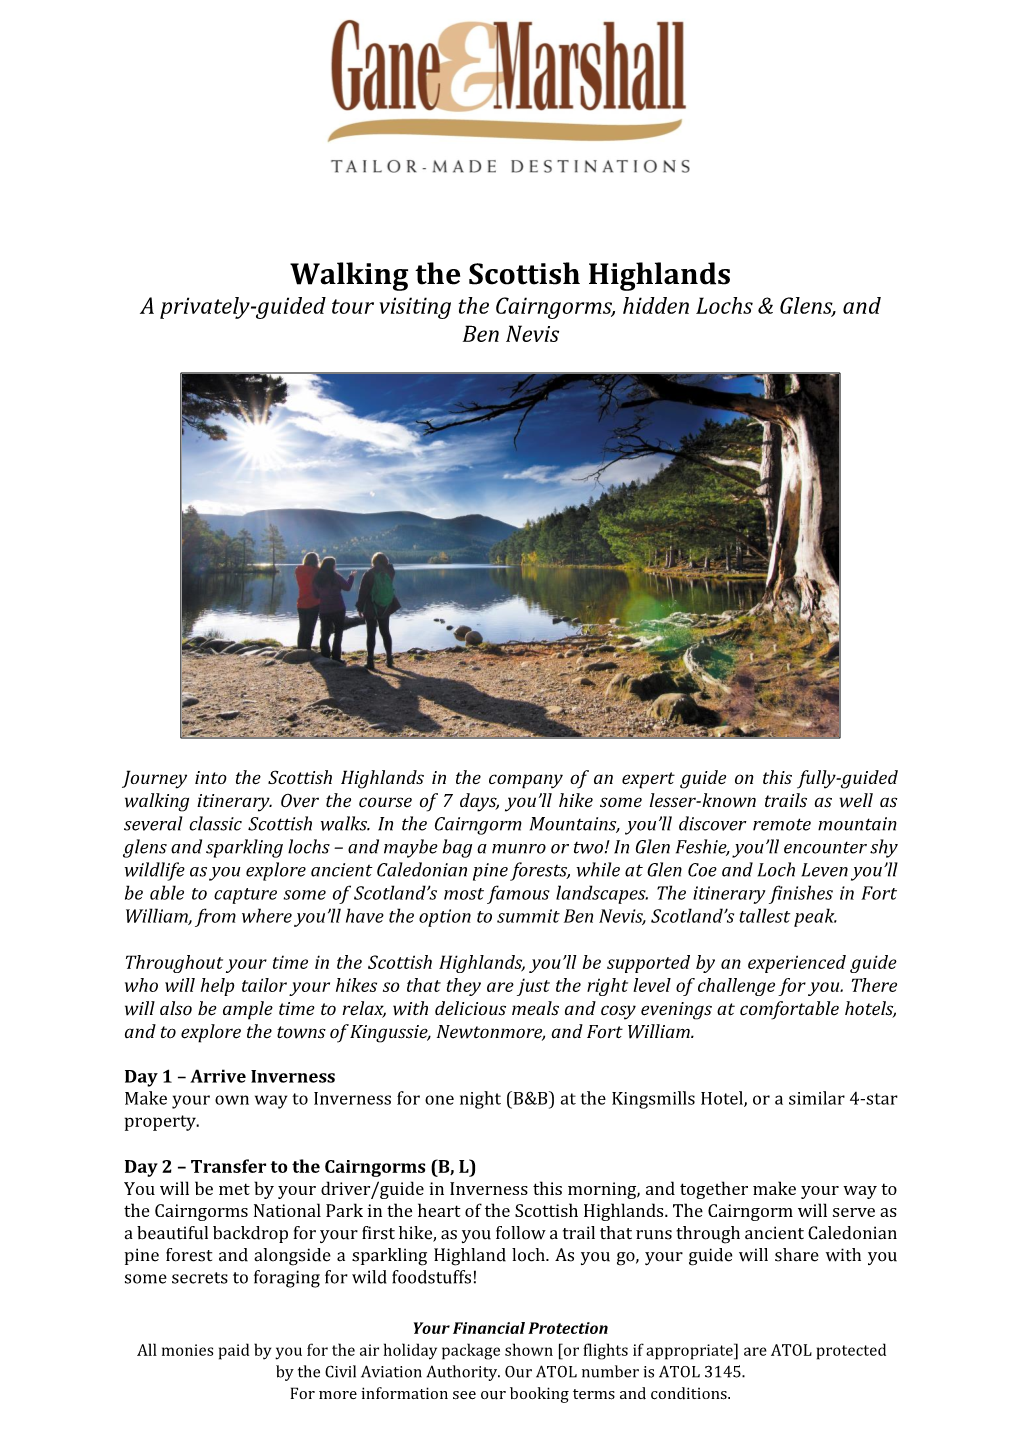 Walking the Scottish Highlands a Privately-Guided Tour Visiting the Cairngorms, Hidden Lochs & Glens, and Ben Nevis